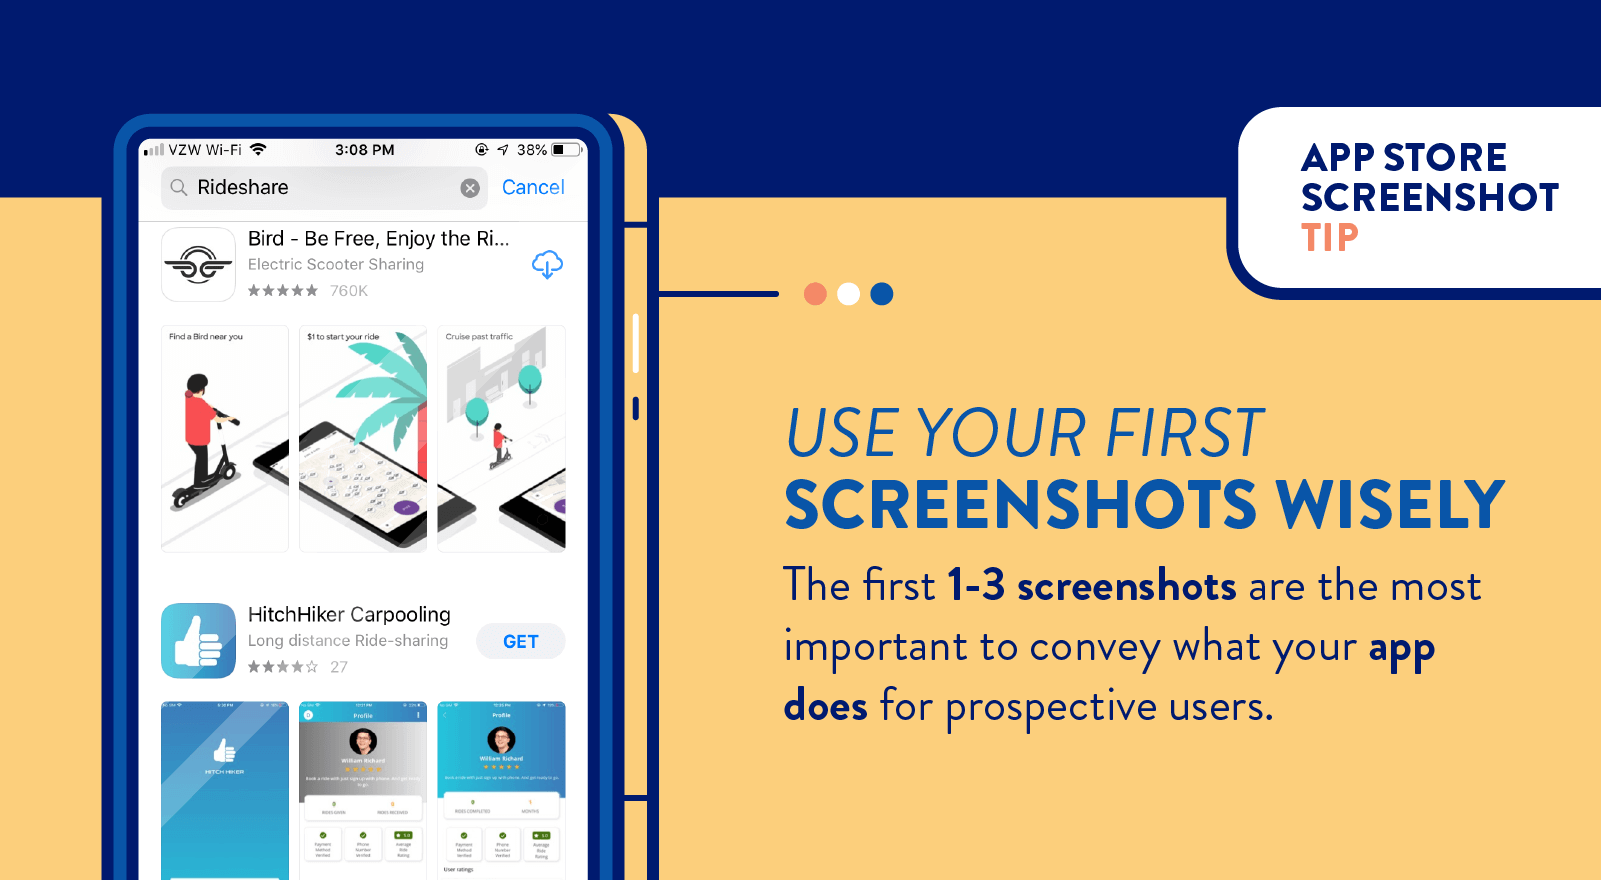 app store screenshots tip to use the first ones wisely